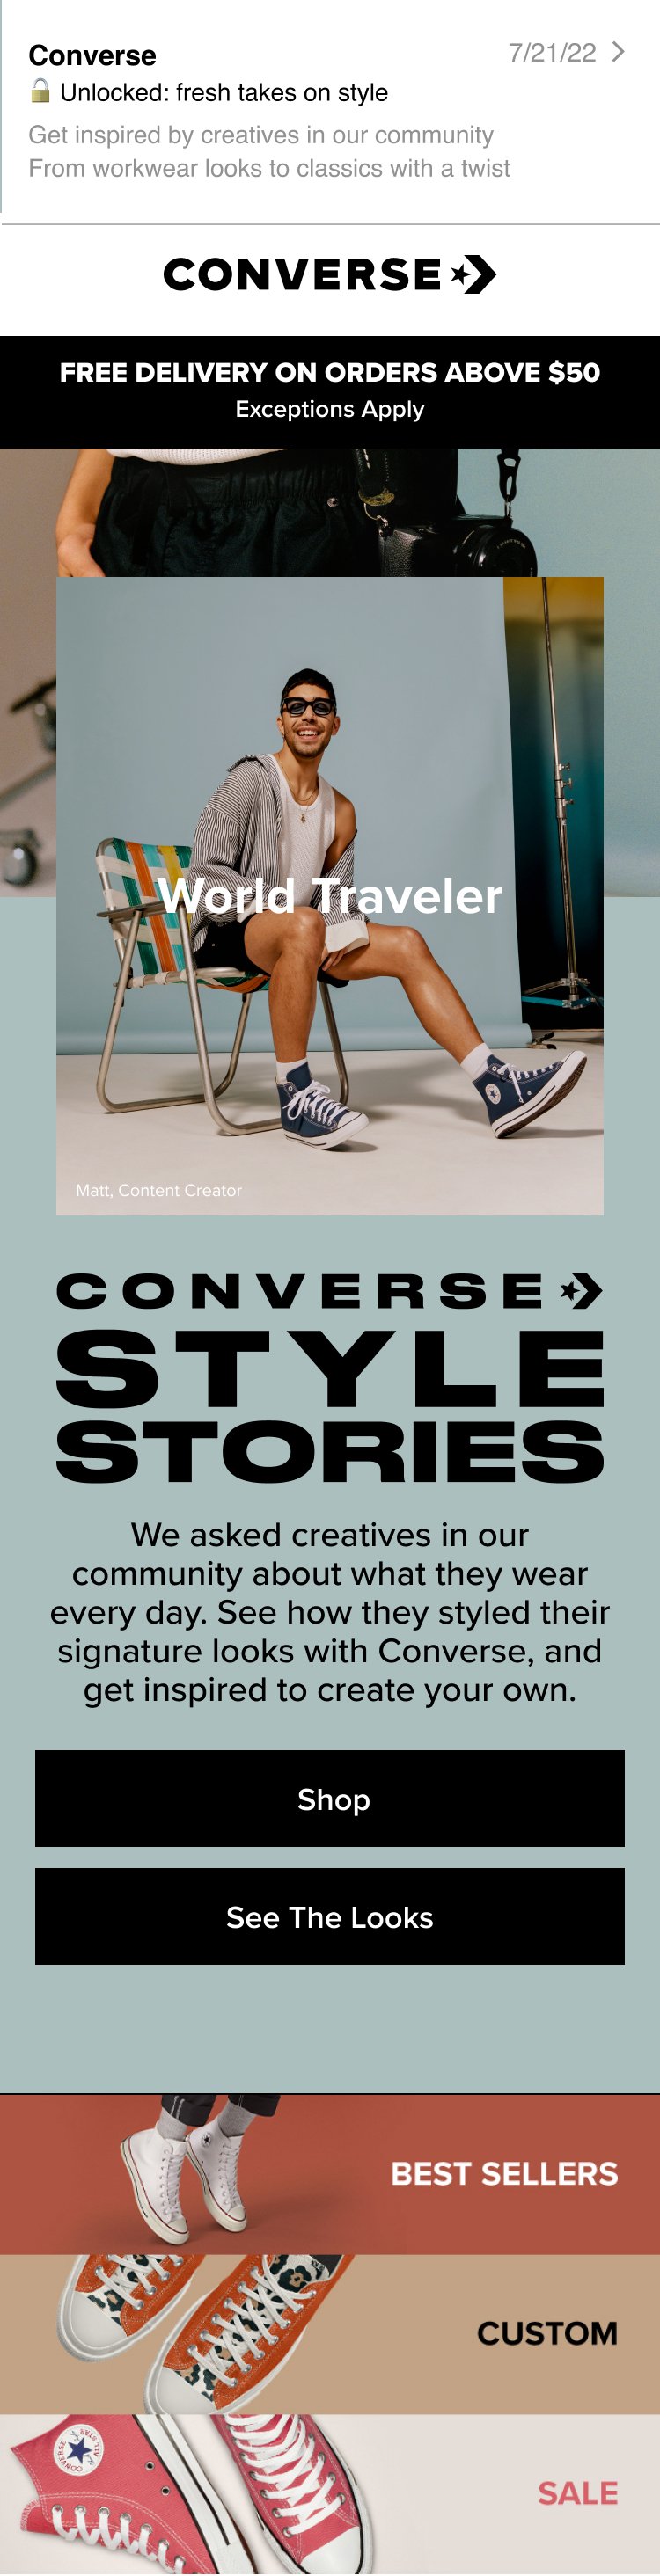 M-Converse_Style-Stories-Email-Mens-SU23.jpg